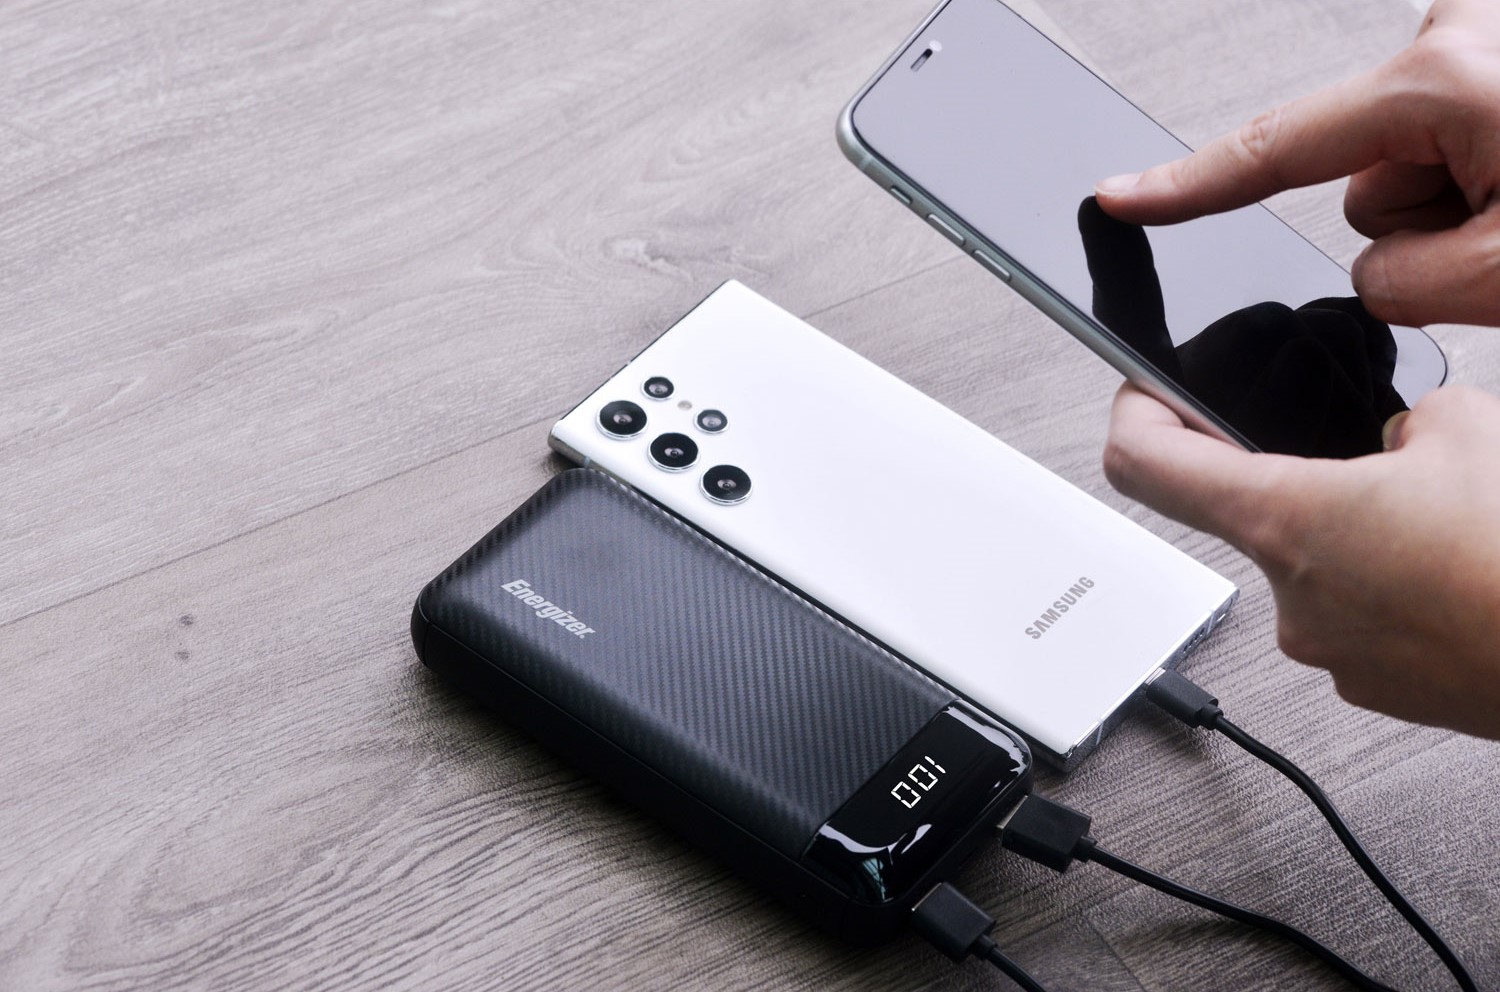 Another benefit of power banks is enhanced productivity. You can charge multiple devices at the same time.